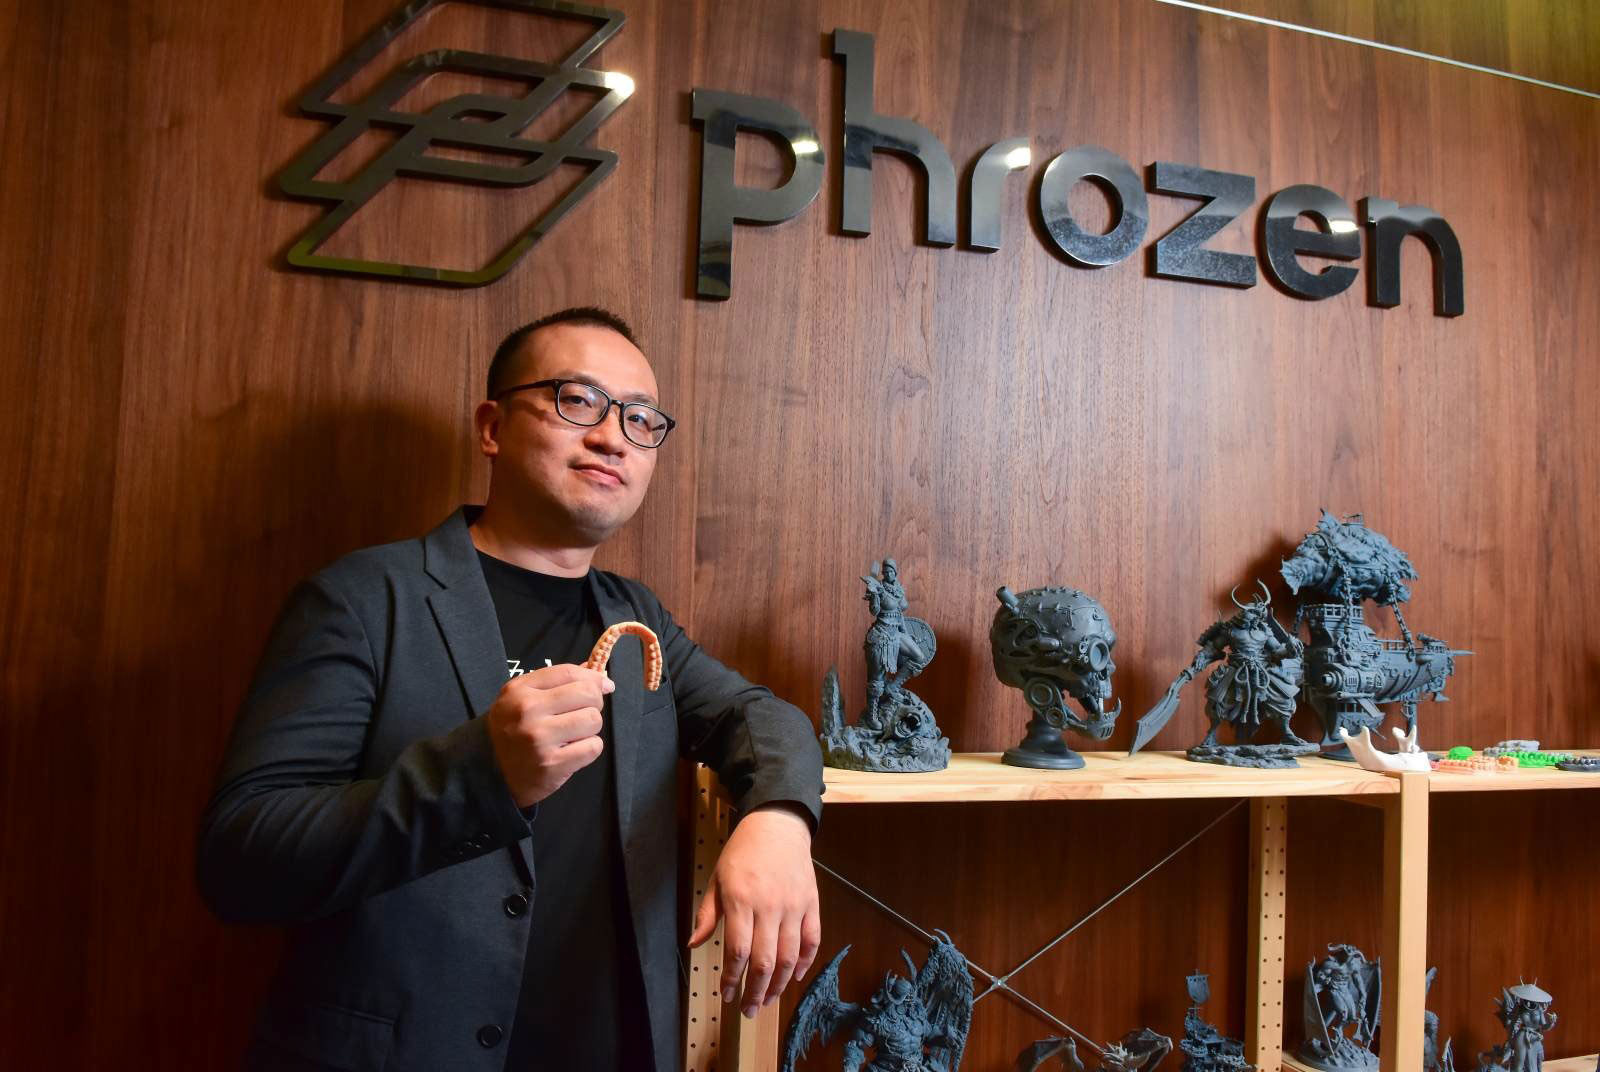 From dentures to rockets: Meet Phrozen, the 3D printing startup from Taiwan